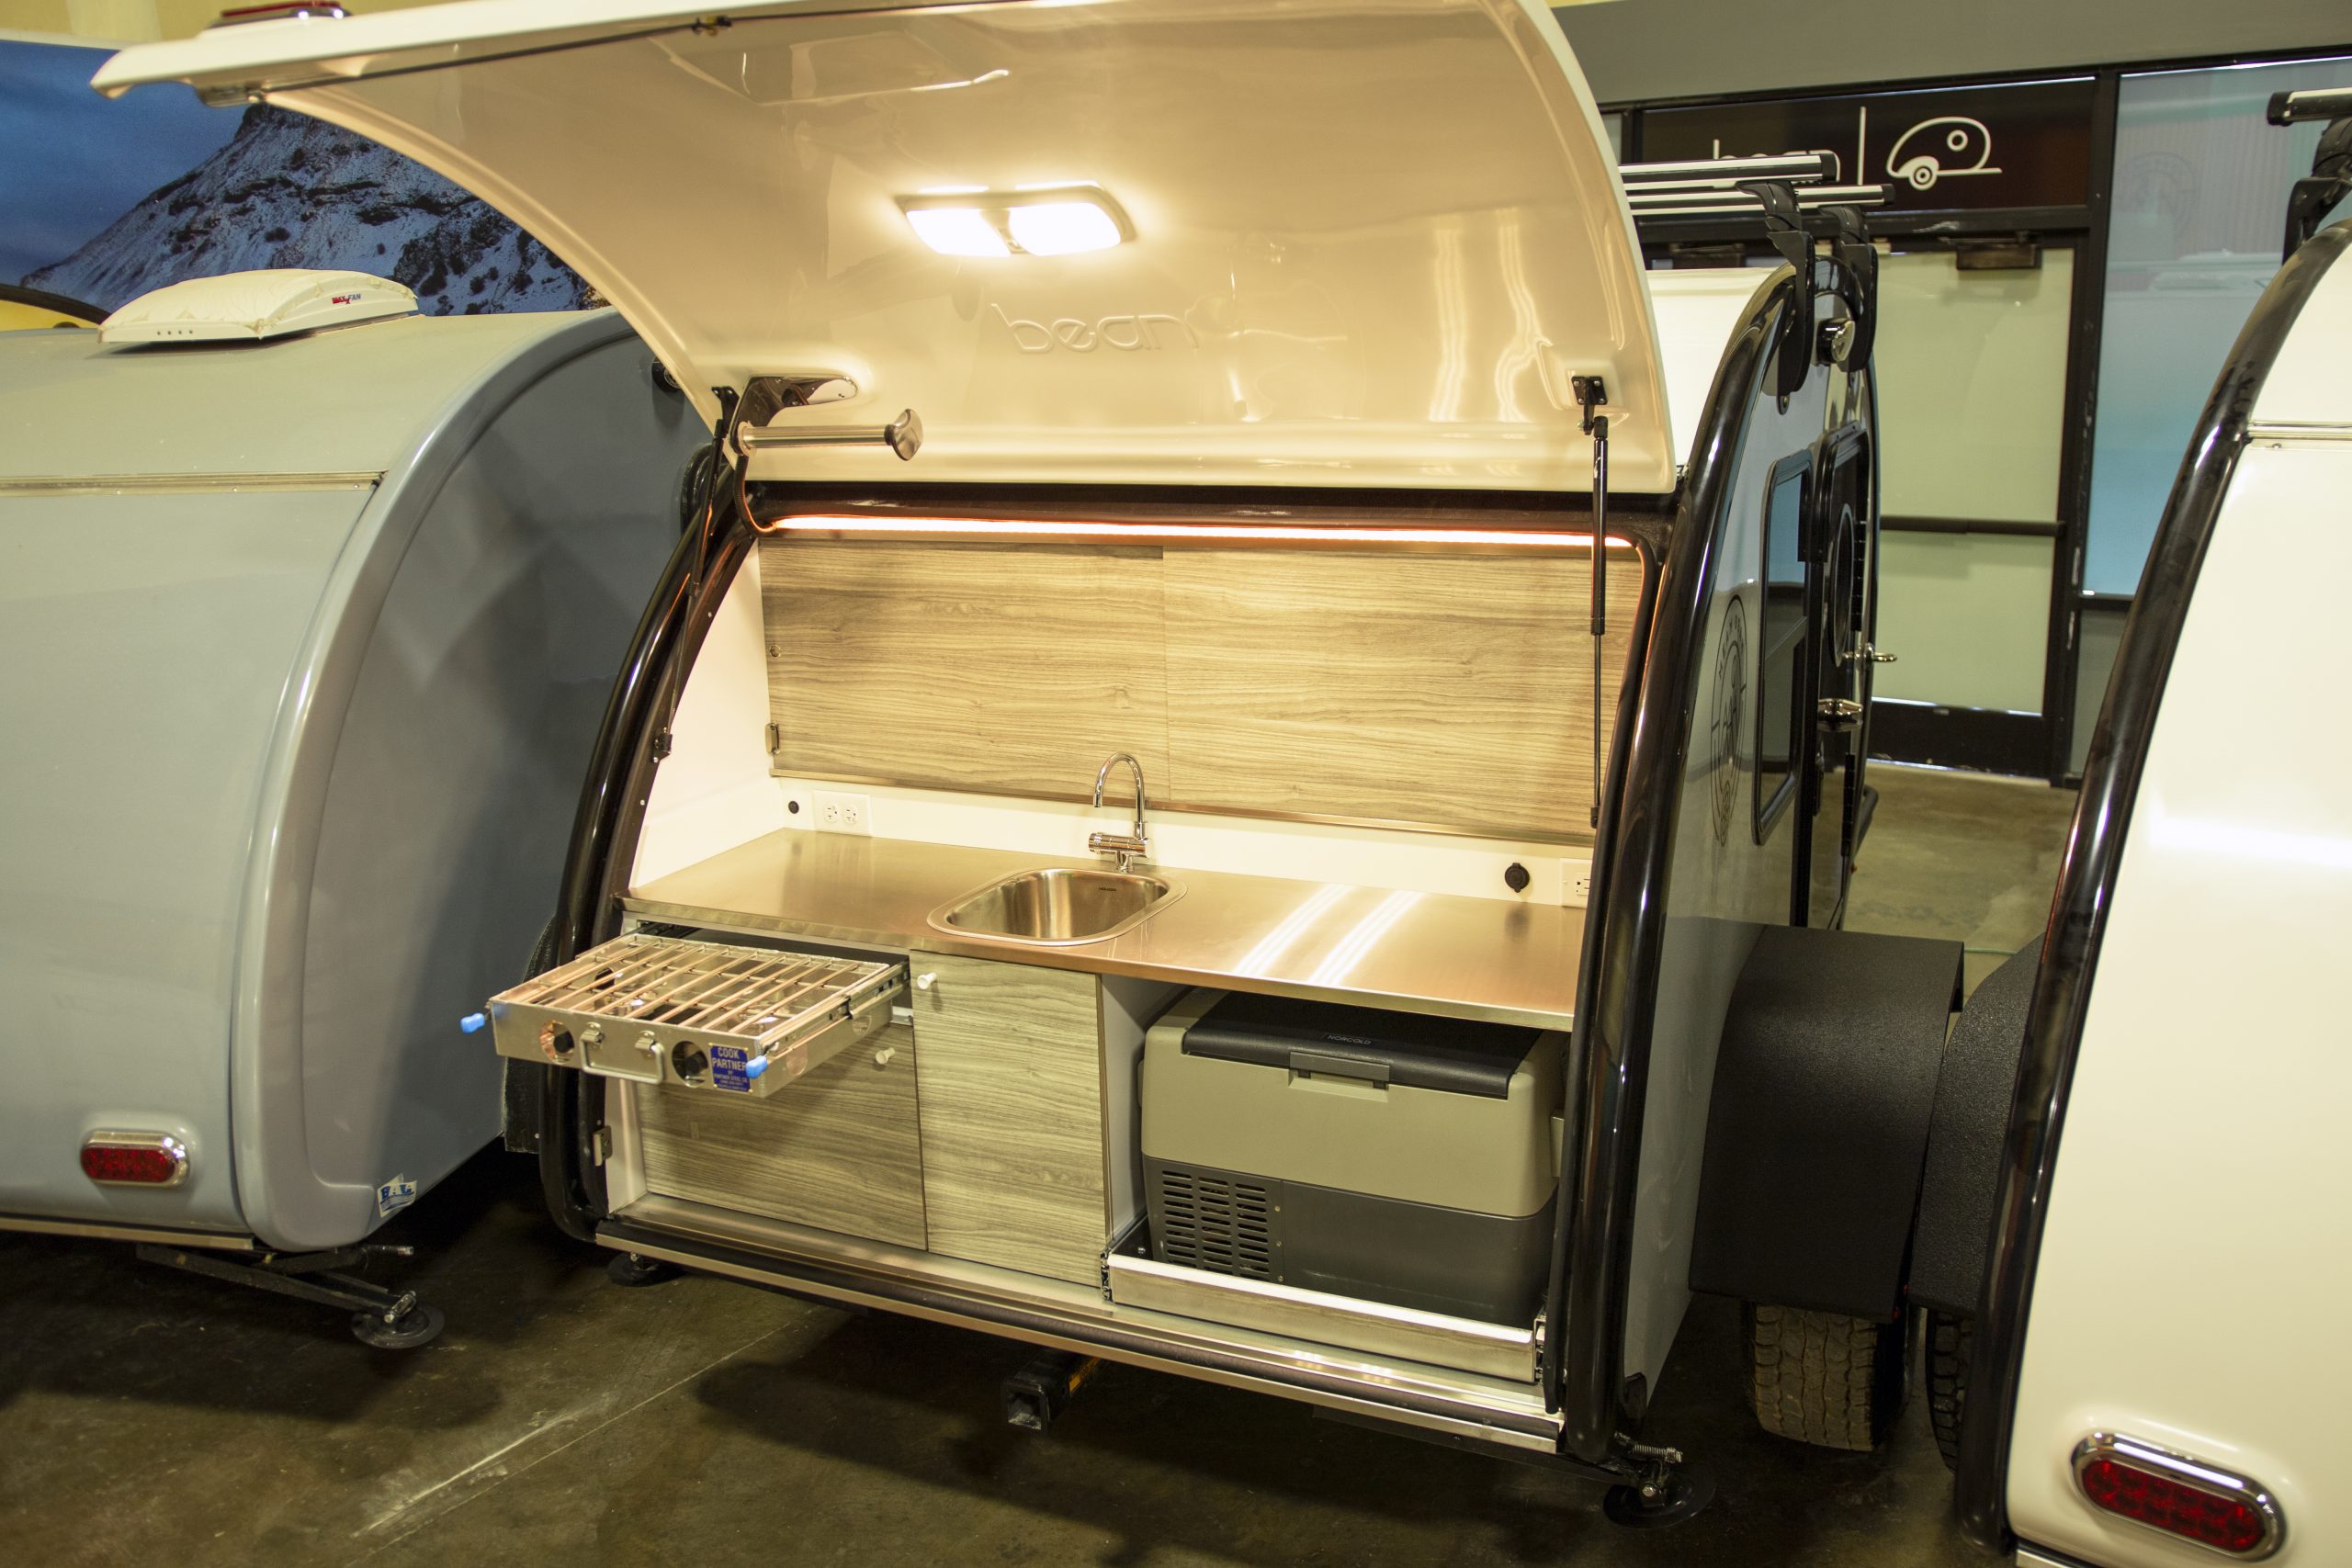 Galley Options | Bean Trailer What Is The Galley Tank On A Camper